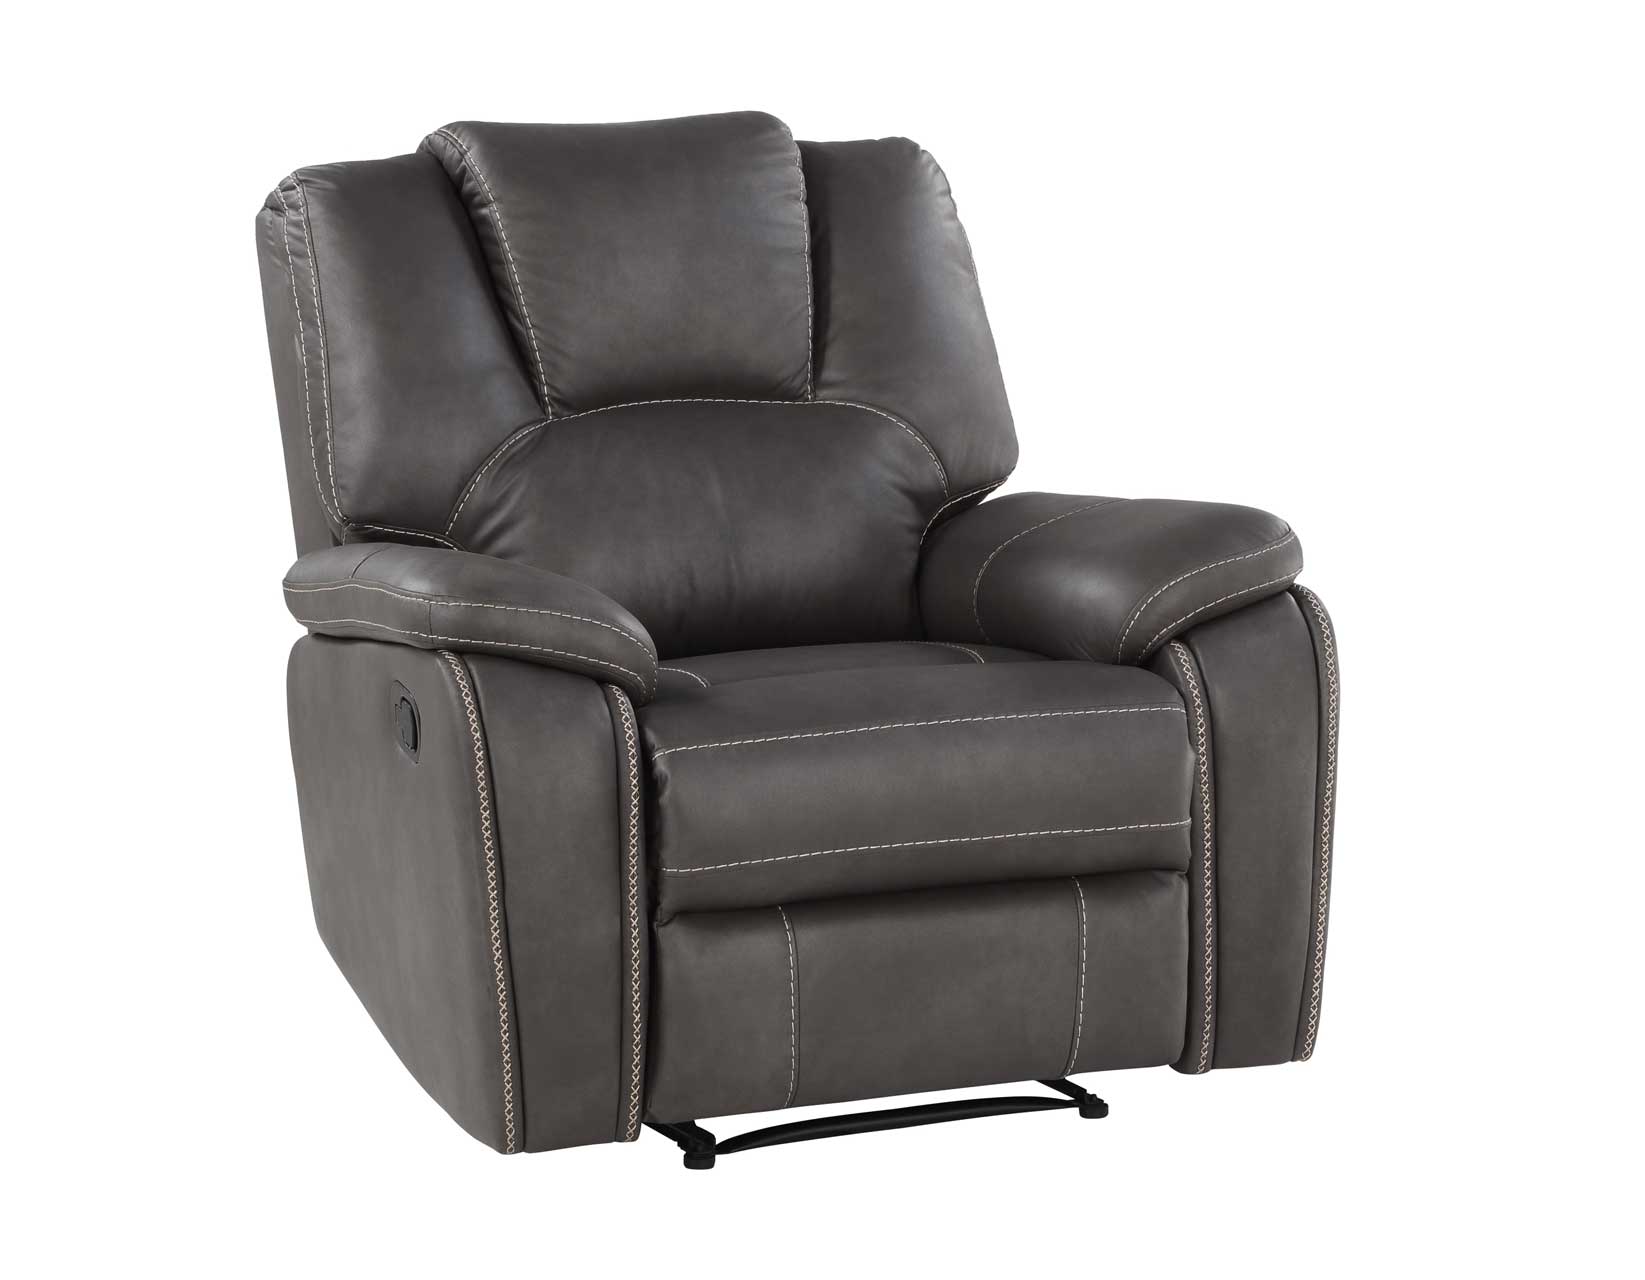 Katrine 3-Piece Manual Motion Set, Charcoal (Sofa, Loveseat & Recliner) from Steve Silver